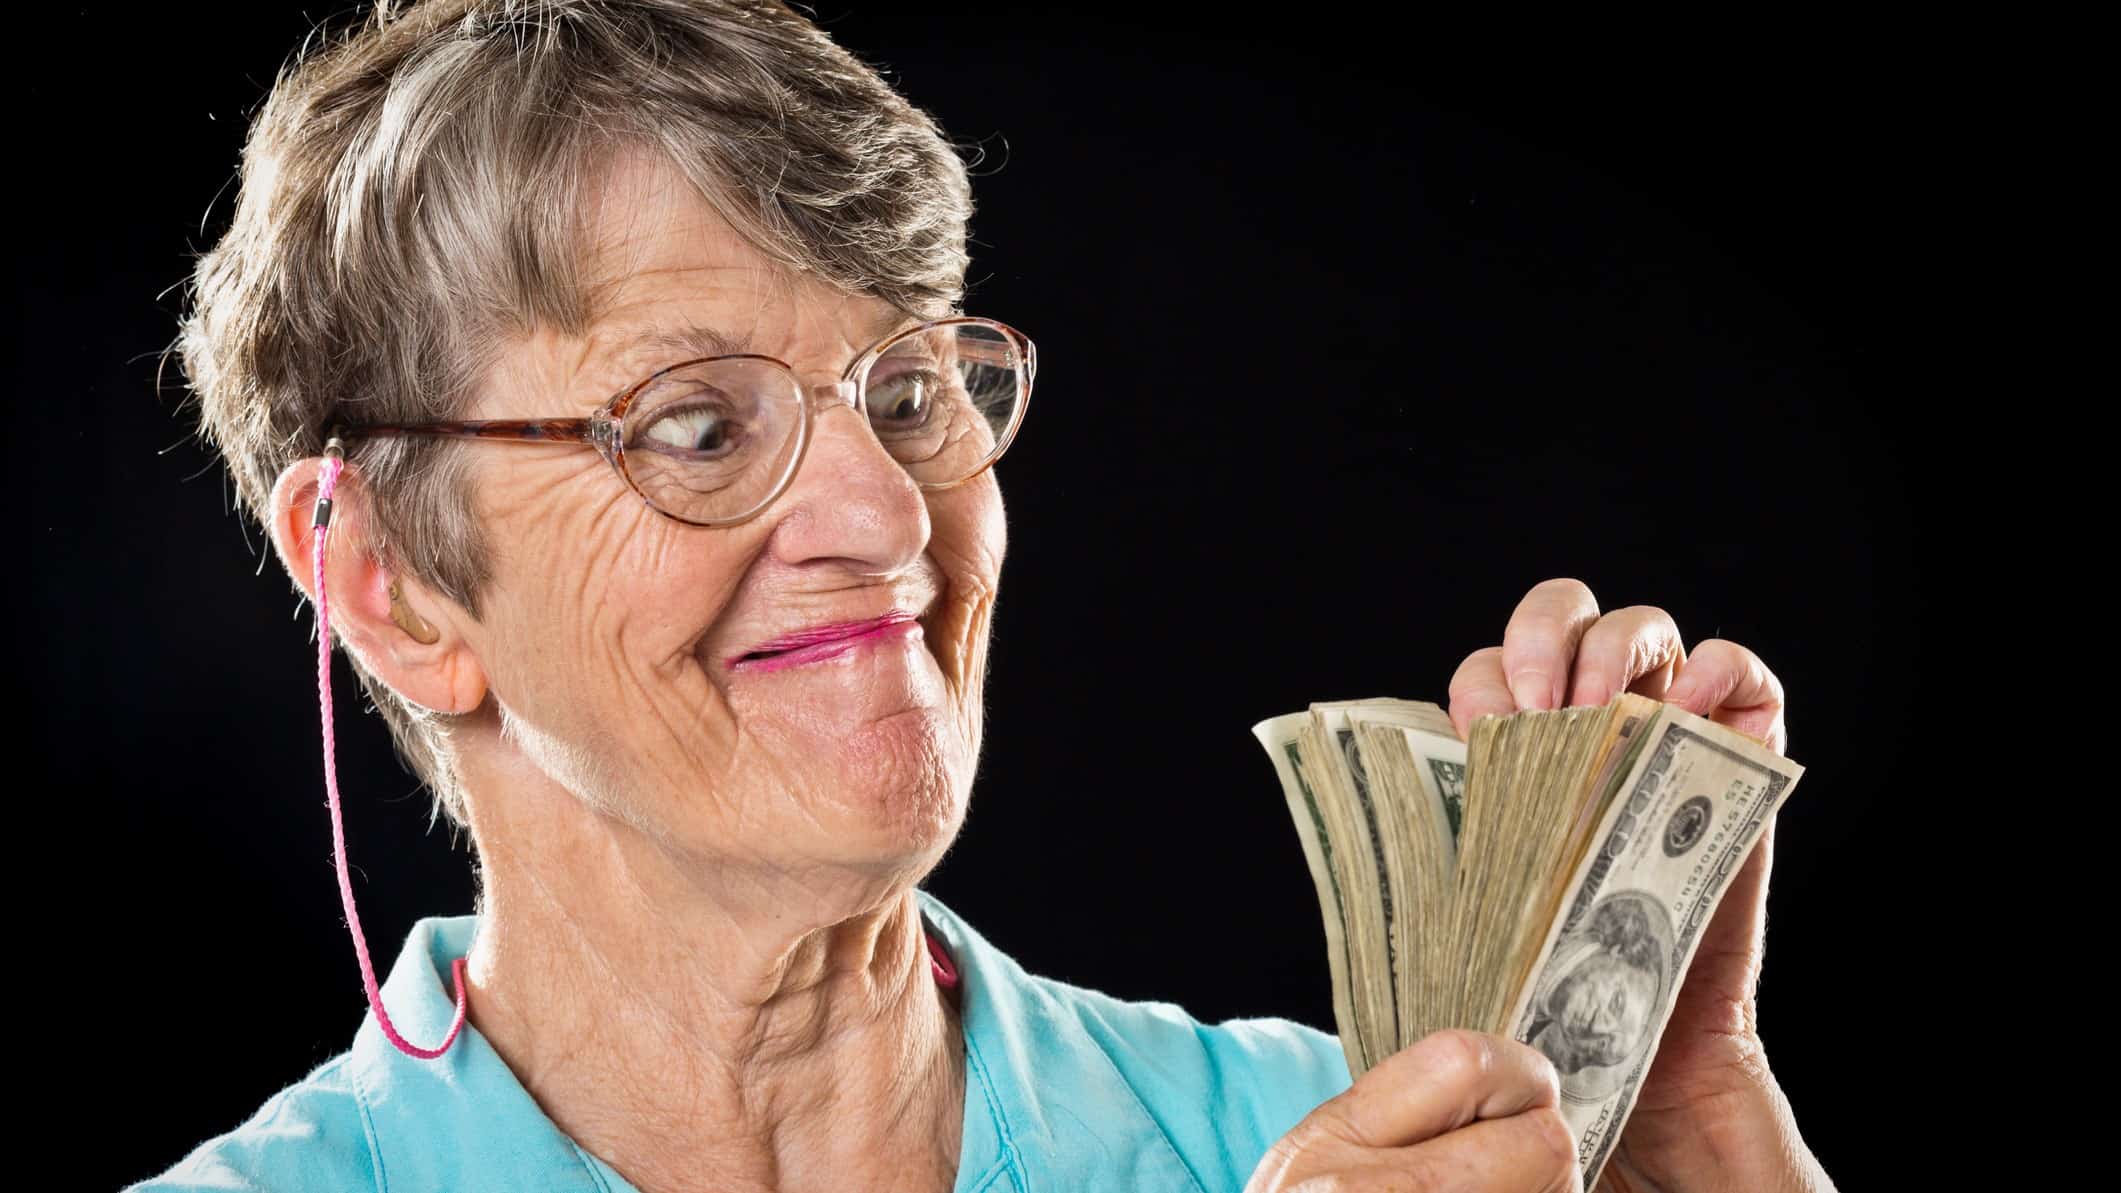 an older woman holds a handful of paper money in her hands and looks at them with a slightly crazy smile on her face wearing her spectacles on a string as a lot of older people do.